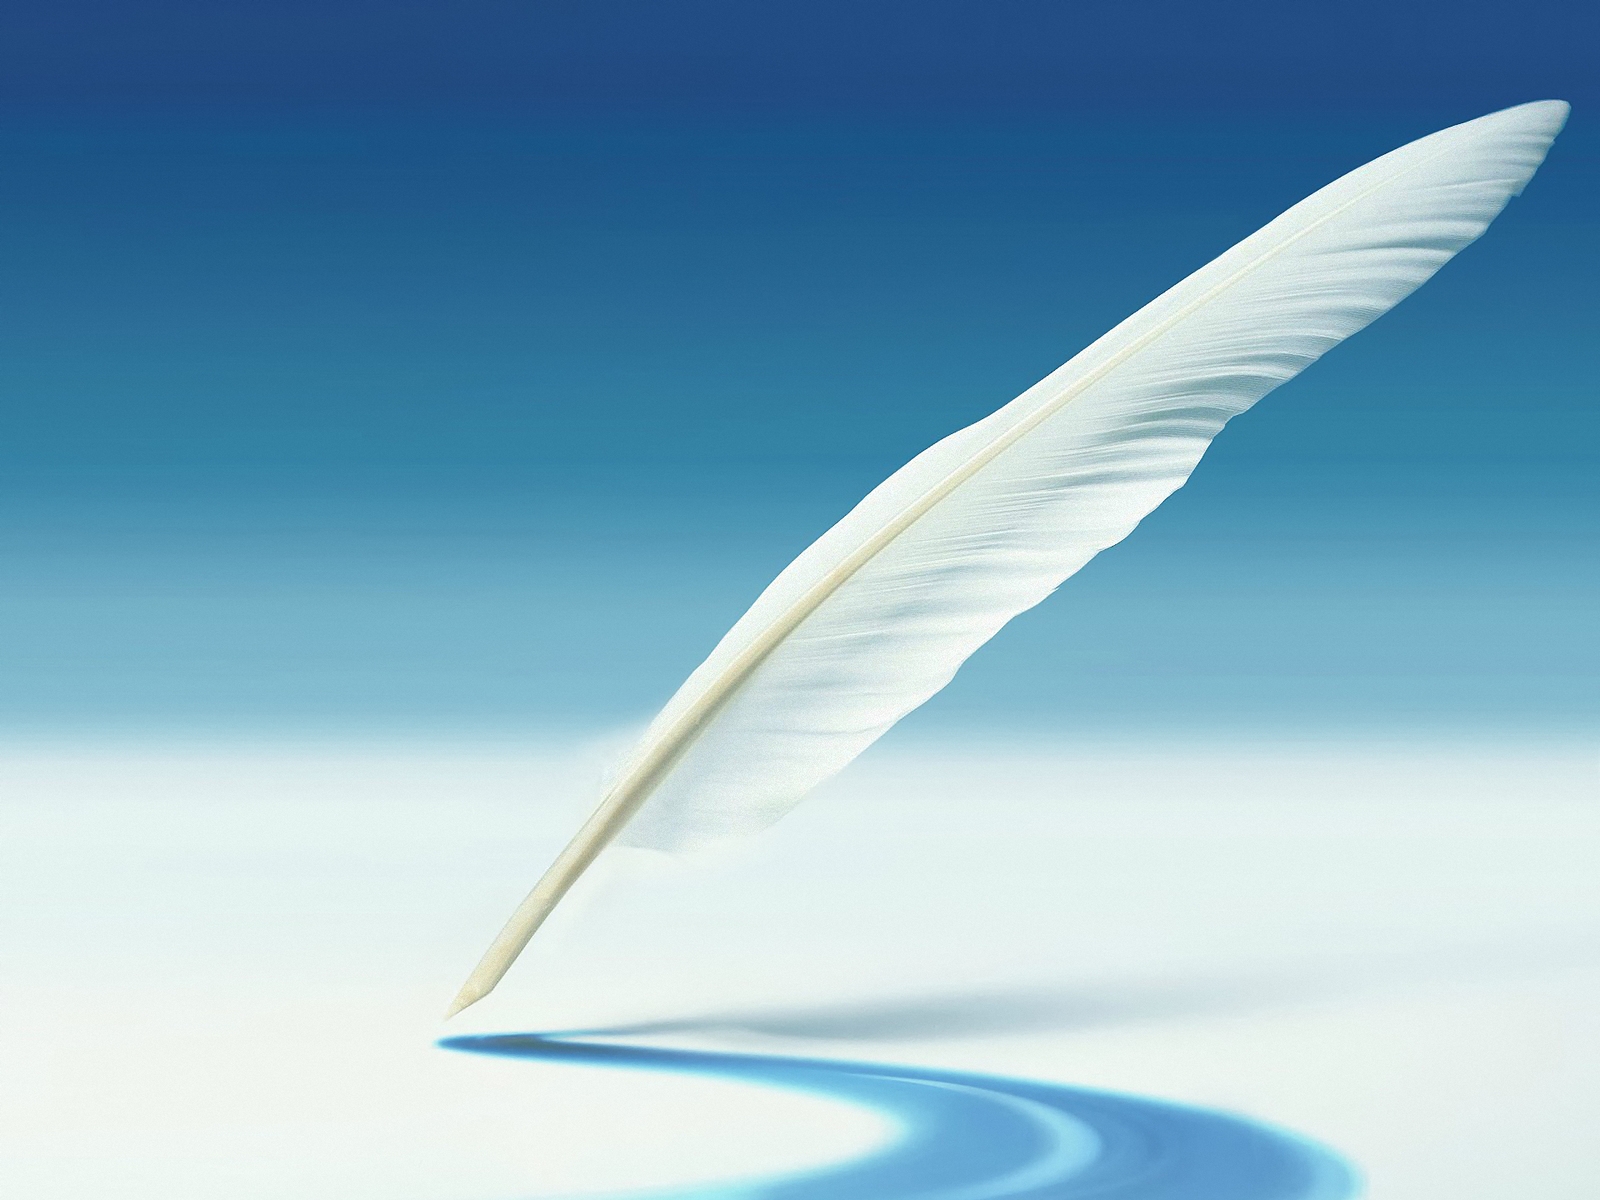 Feather Pen for 1600 x 1200 resolution